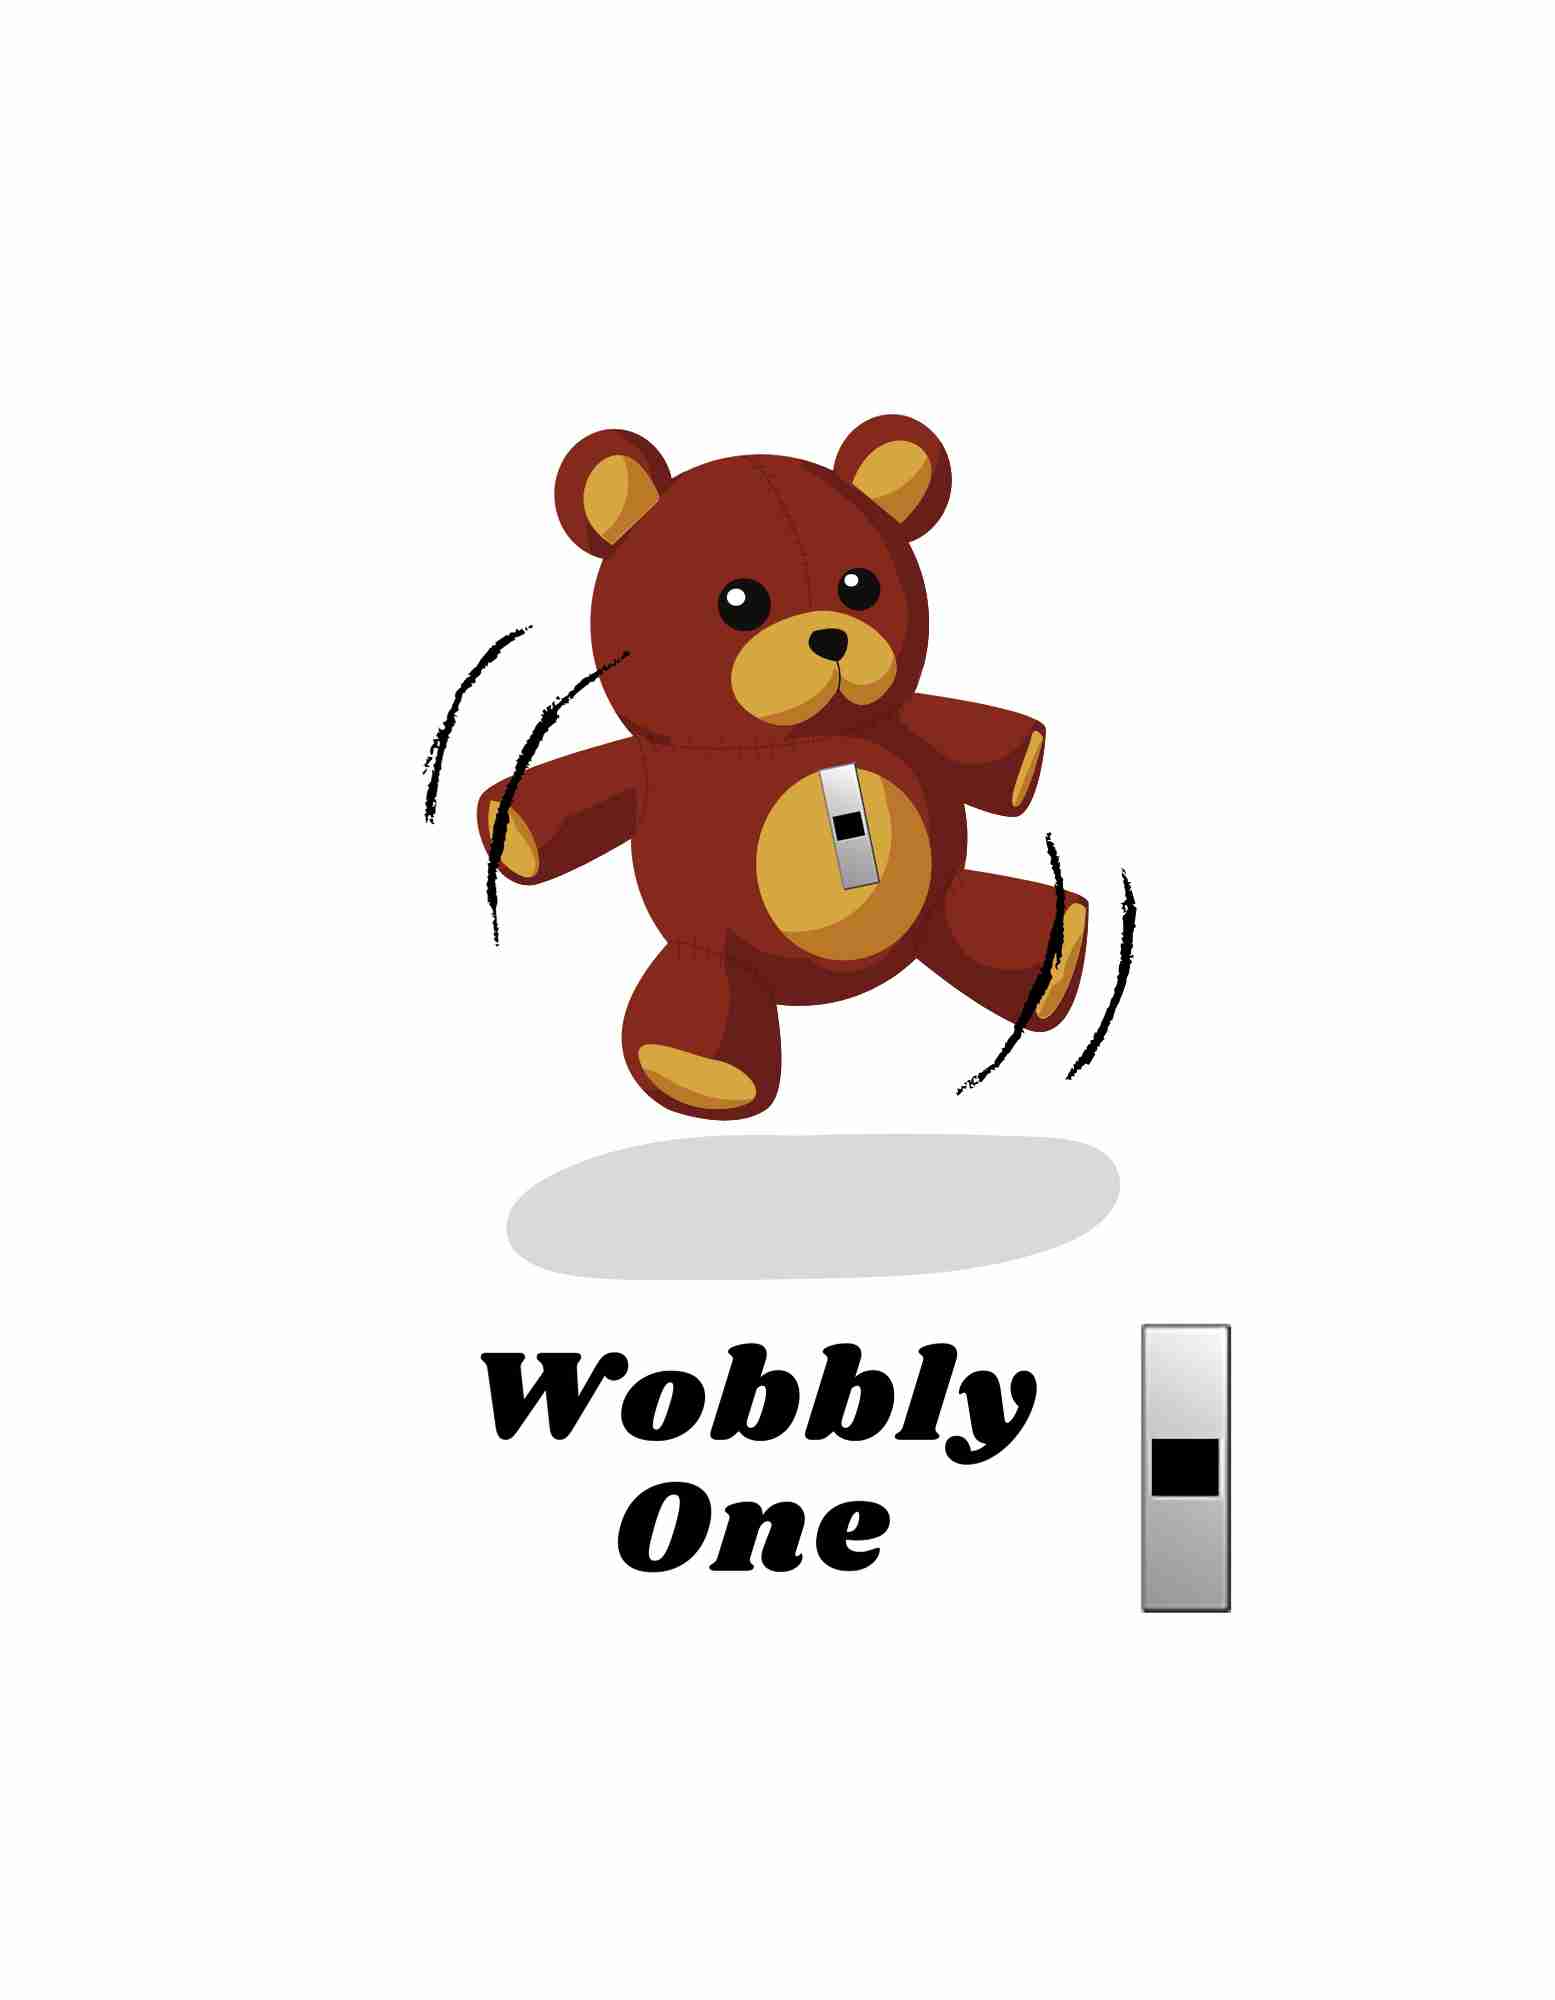 Warrant Officer Ones are referred to as Wobbly Ones or WOJGy bears.